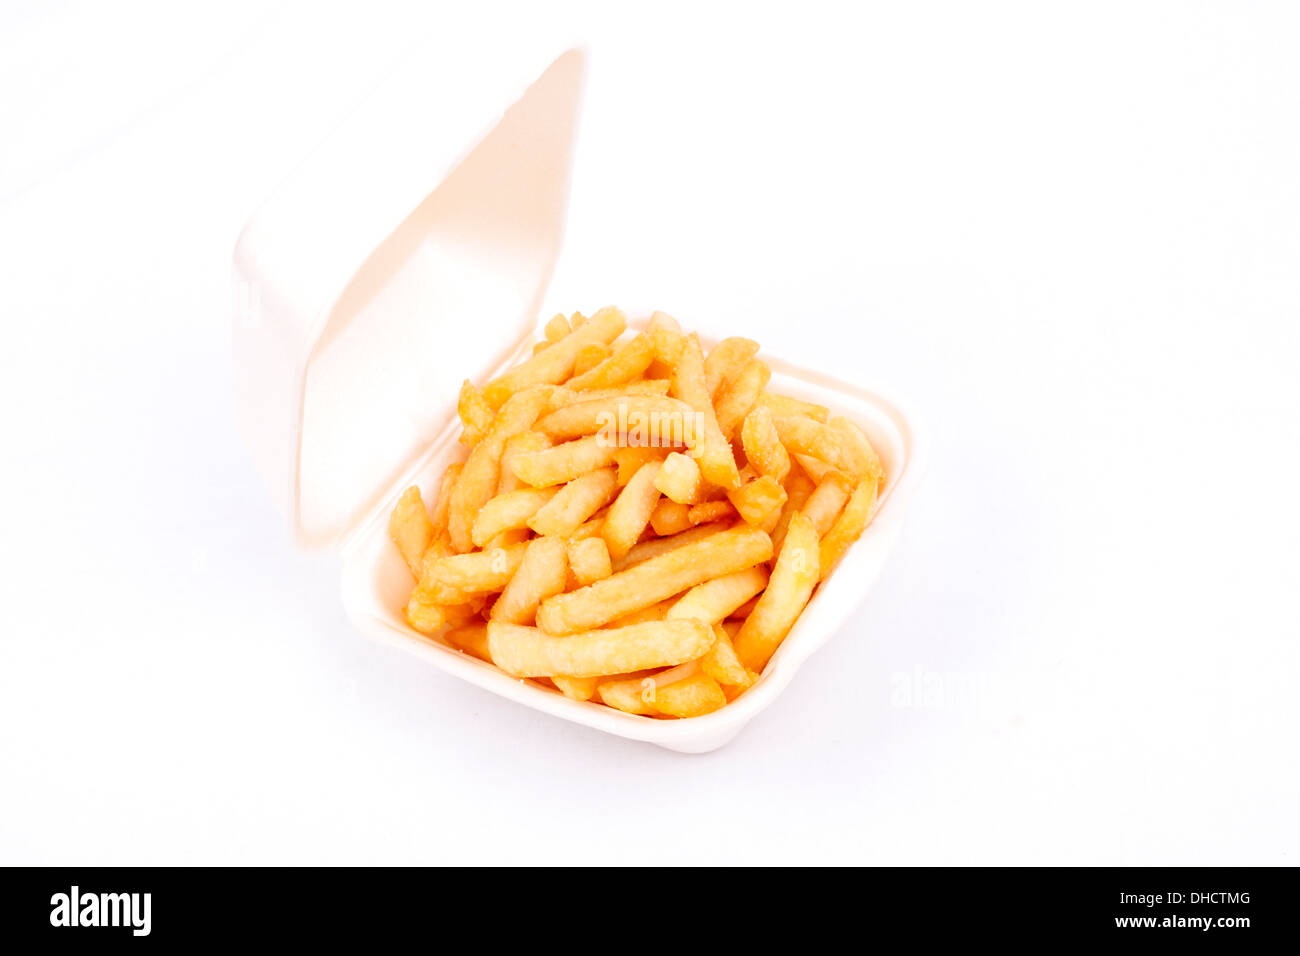 French fries take away isolated on white background Stock Photo